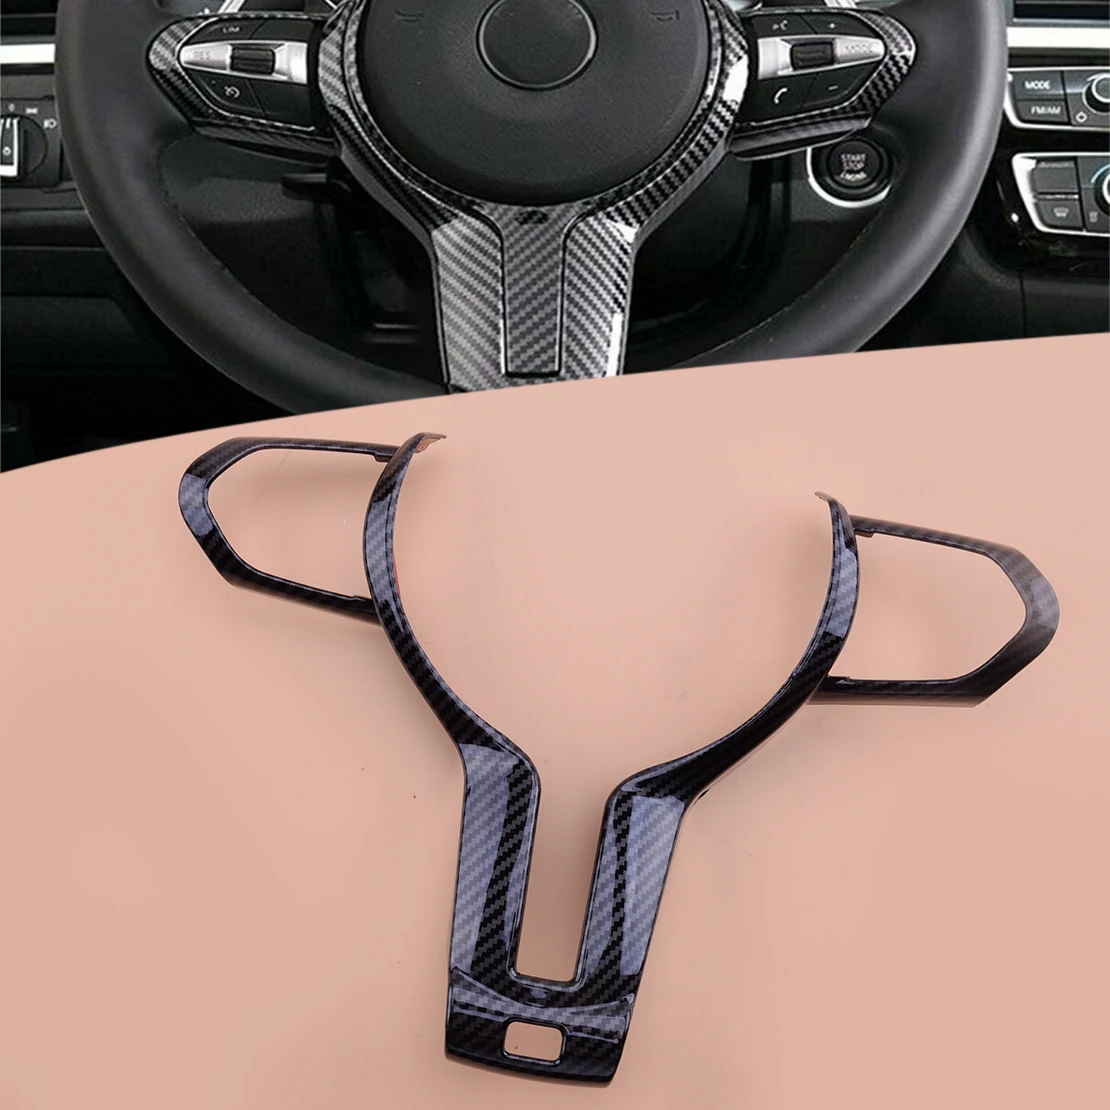 

ABS Front Steering Wheel Cover Trim Fit for BMW F22 F23 F30 F31 F34 F32 F33 F36 F10 F15 X5 F16 X6 2015-2017 Carbon Fiber Style